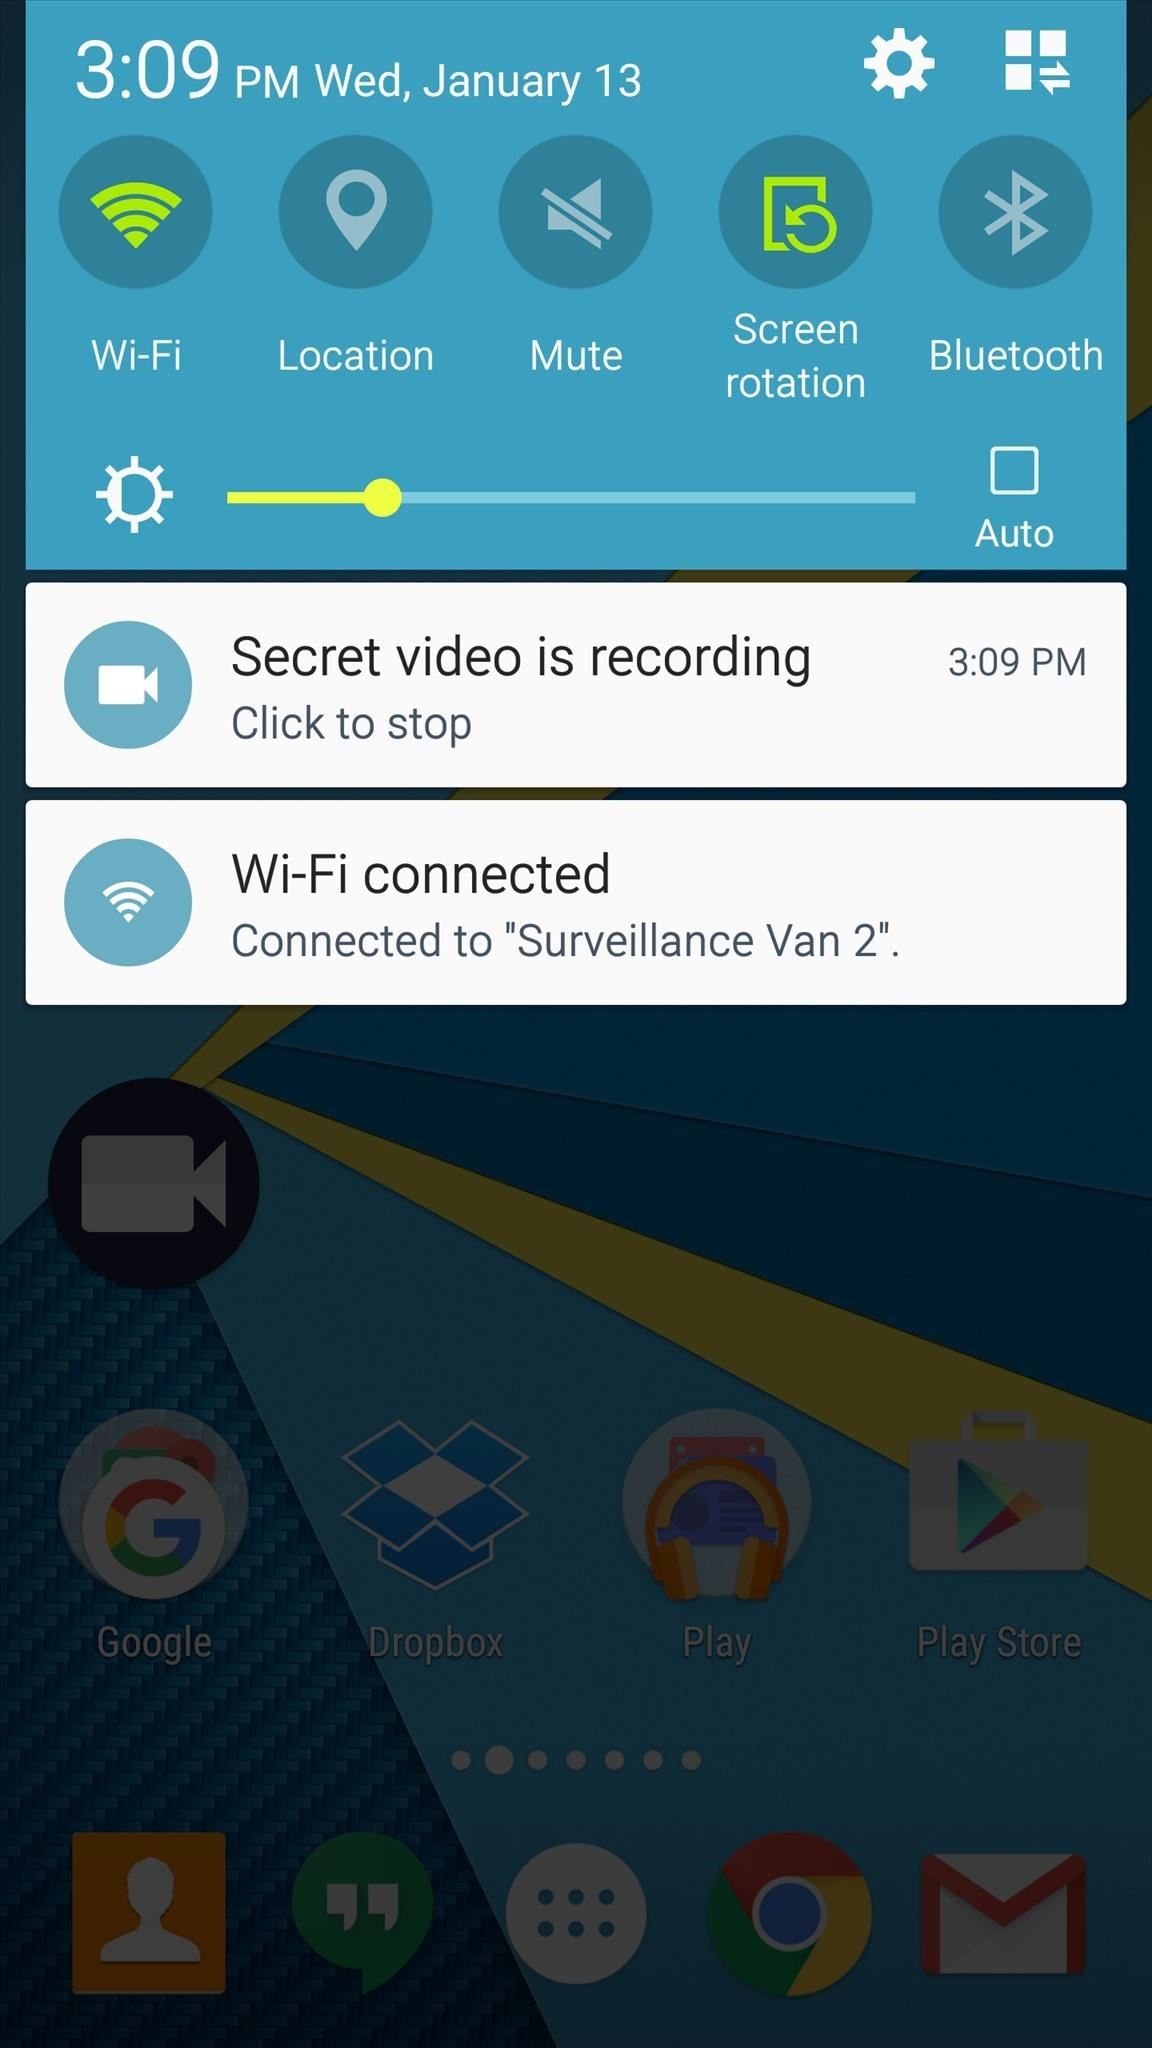 How to Secretly Record Videos on Android